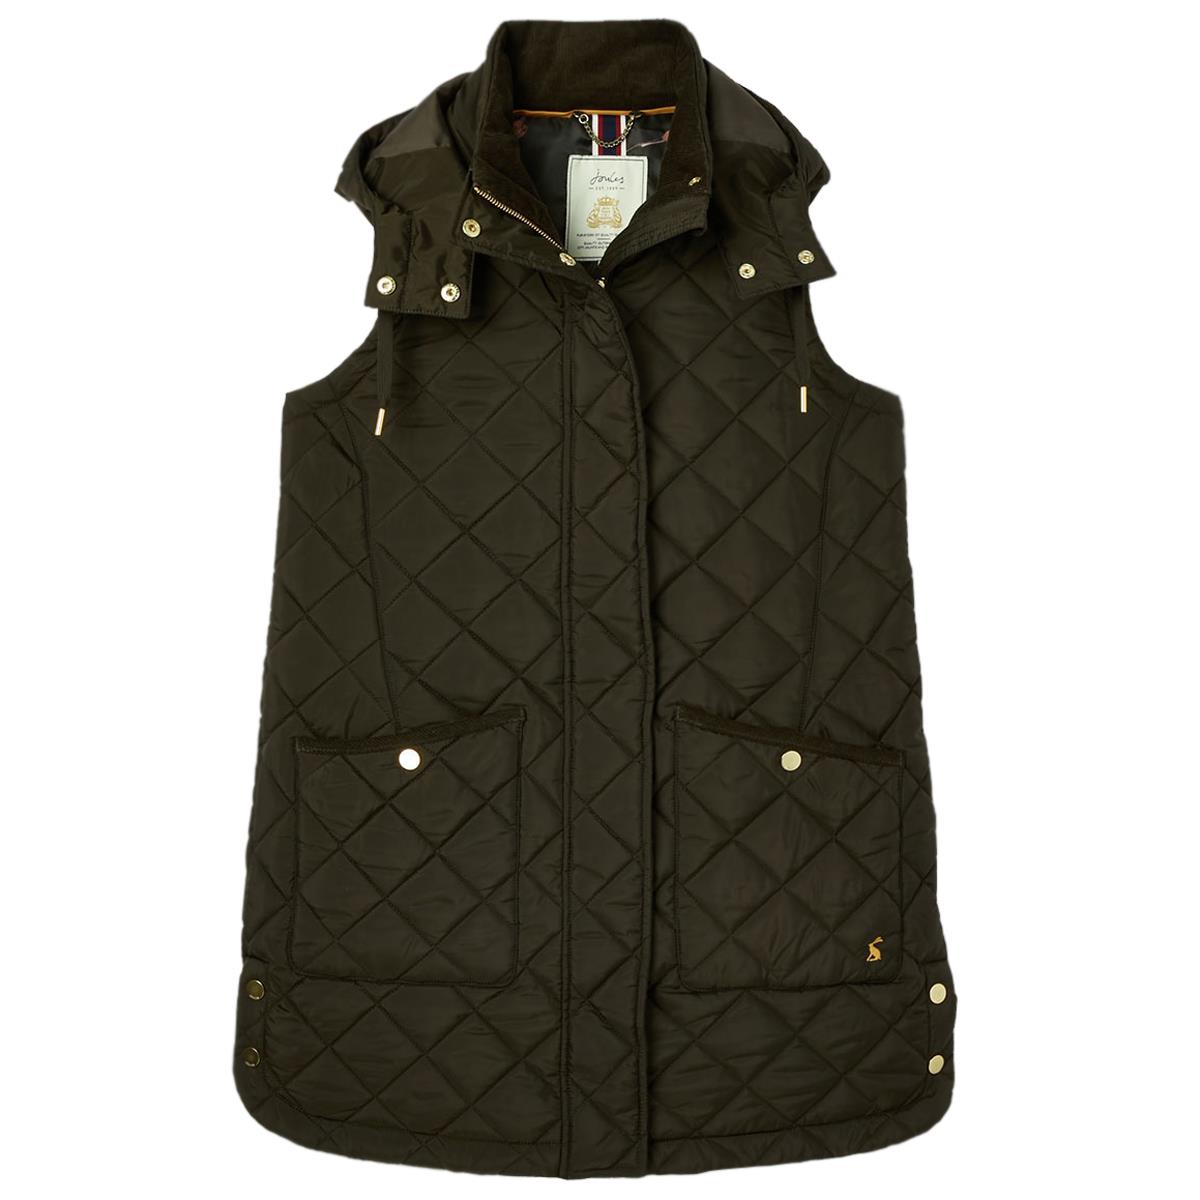 What are the features of the Joules Chatham gilet?